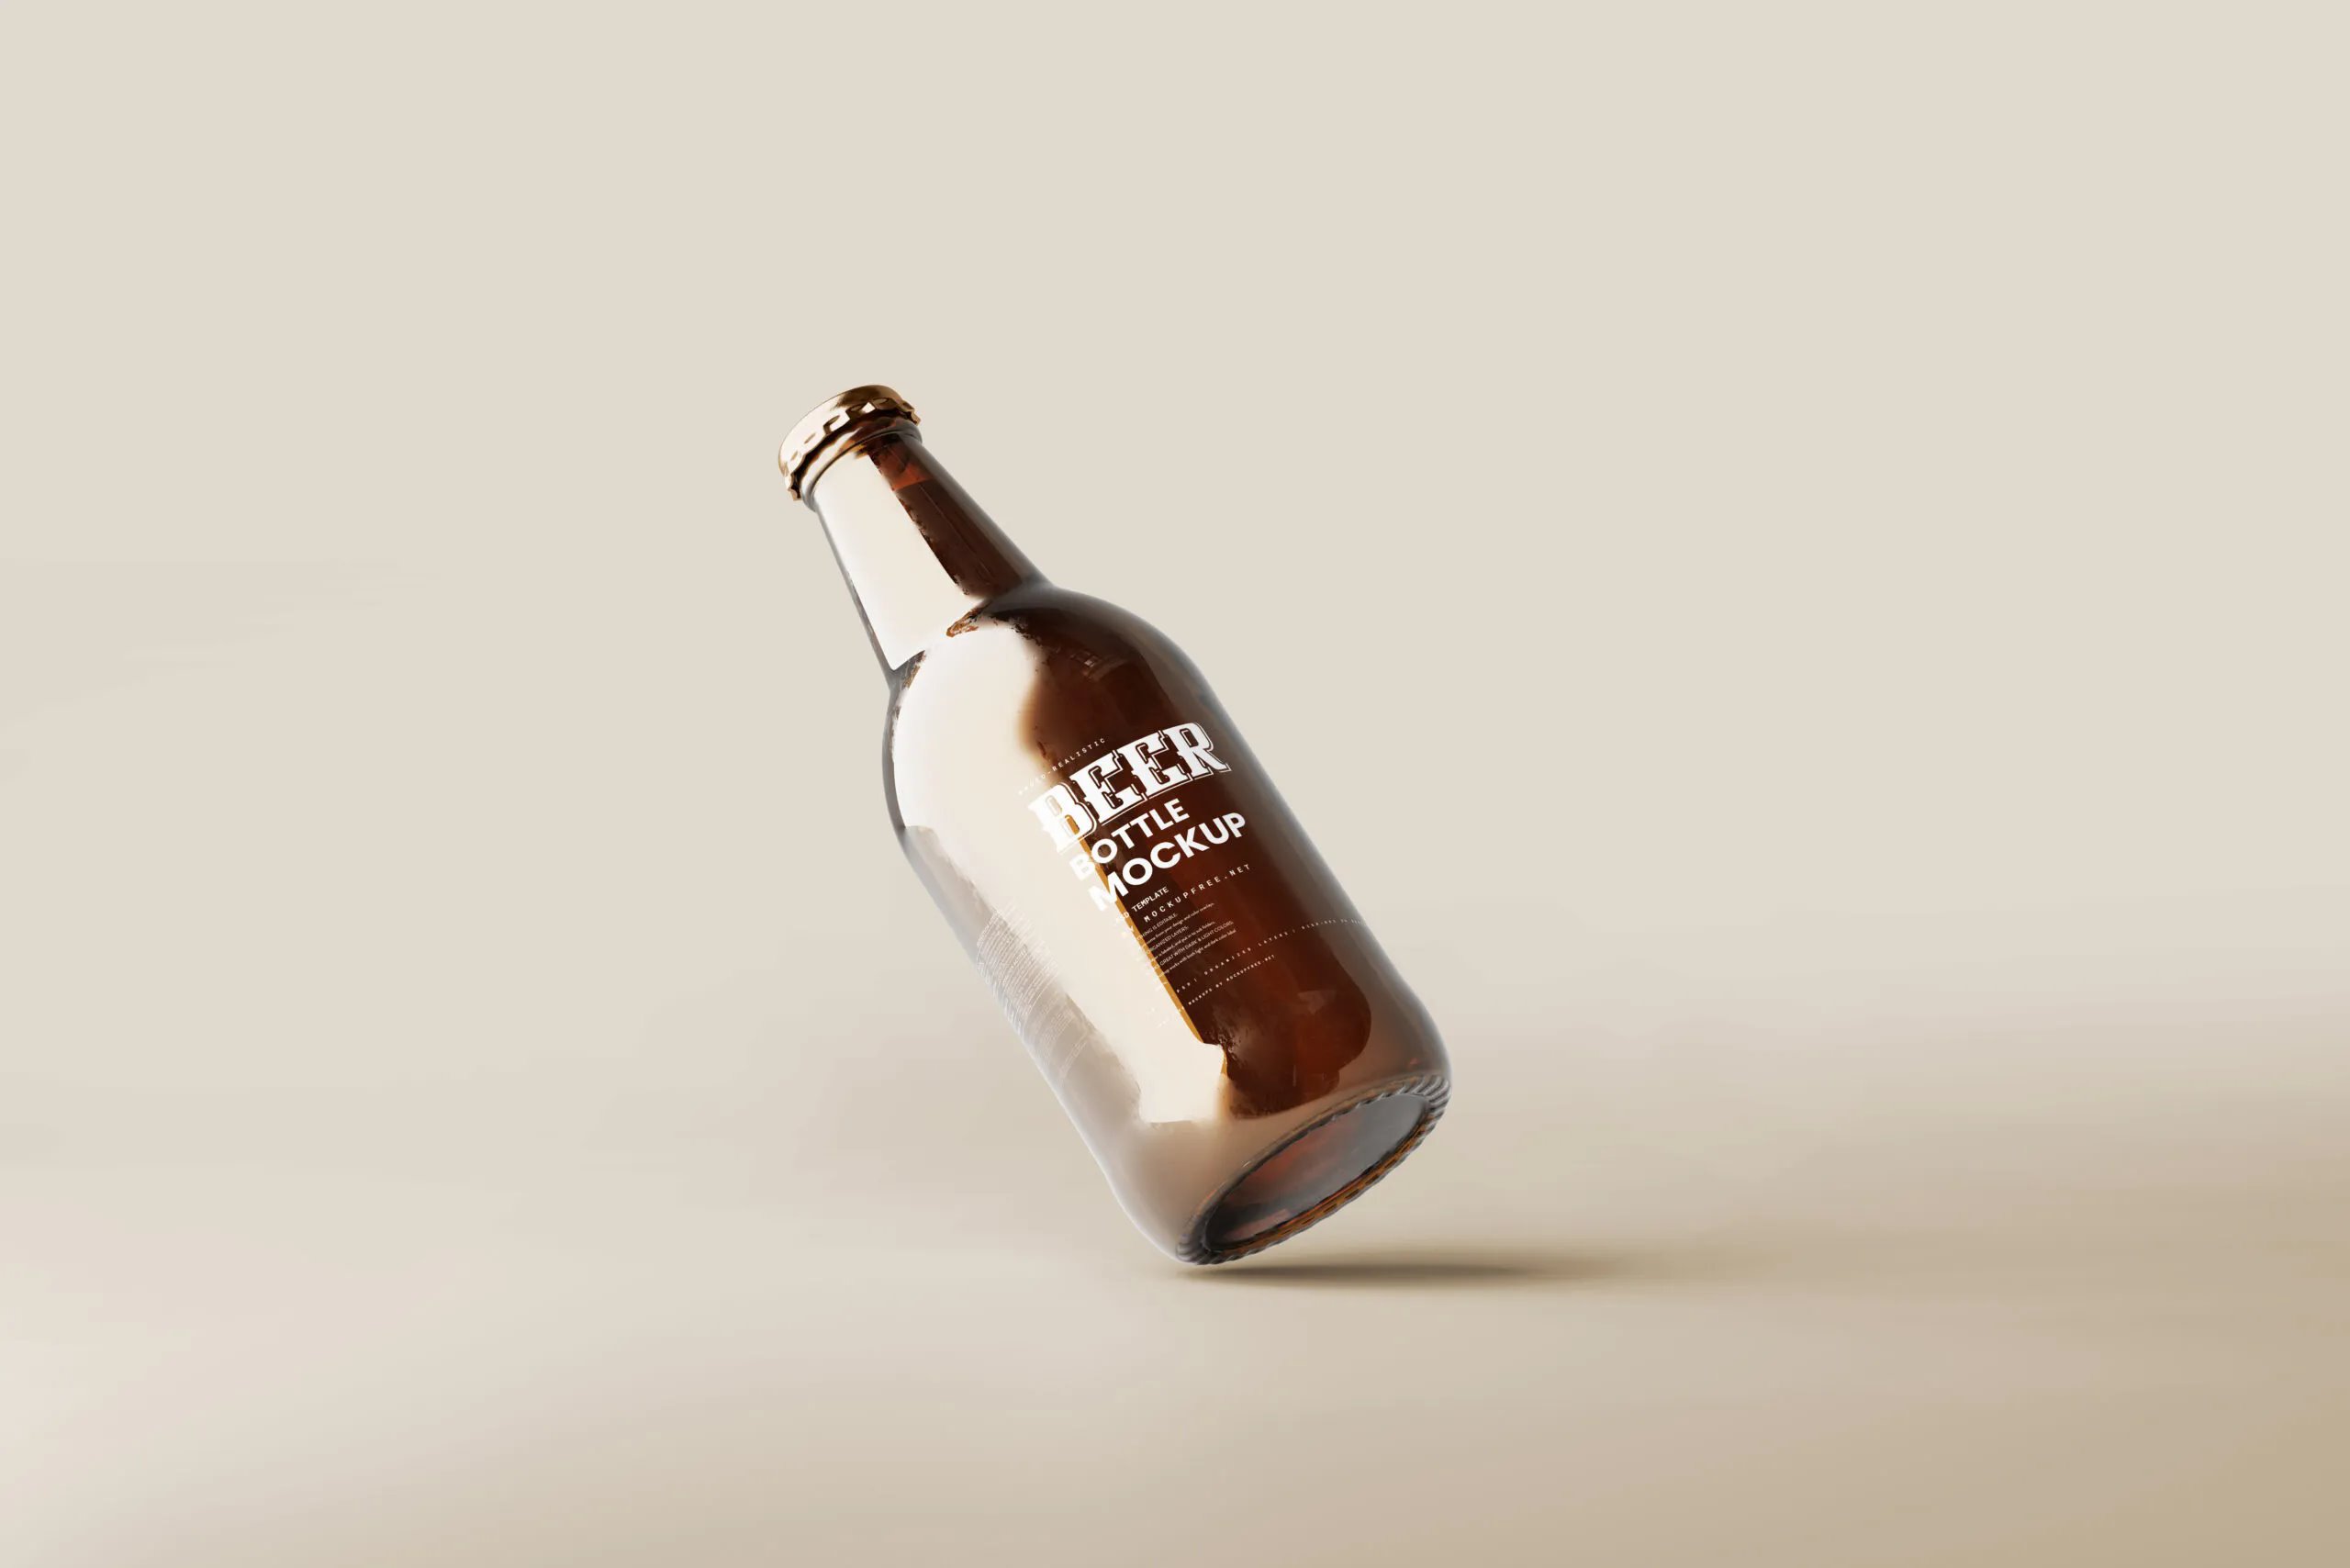 5 Lager Beer Bottle Mockups in Different Views FREE PSD